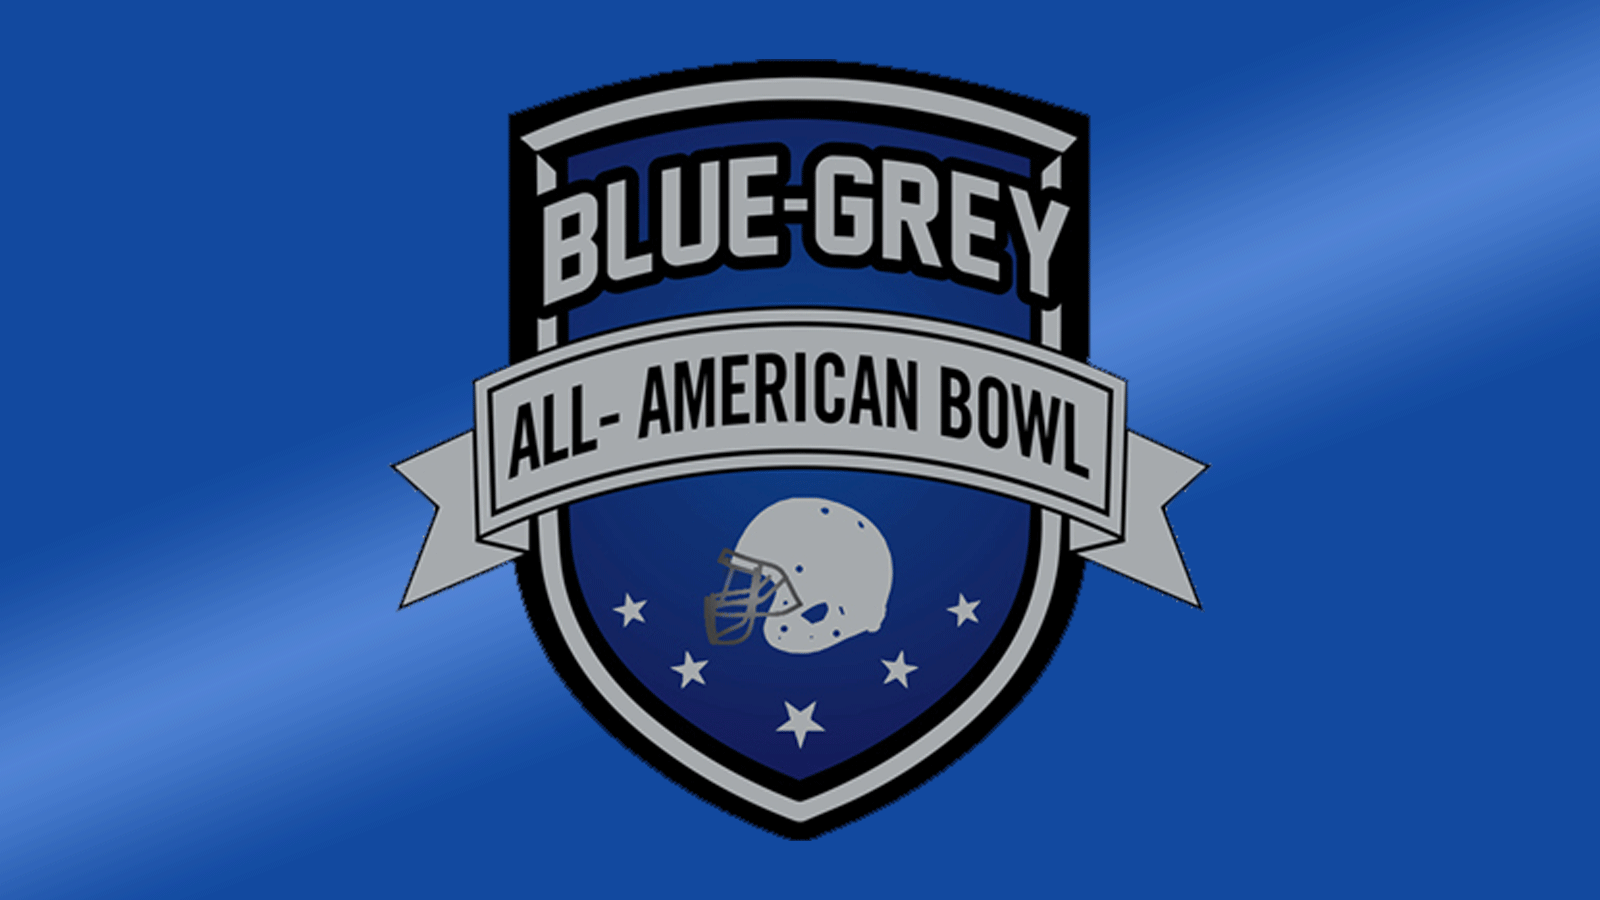 https://stanlyjournal.com/wp-content/uploads/2020/09/blue-grey-all-american-bowl-logo.gif